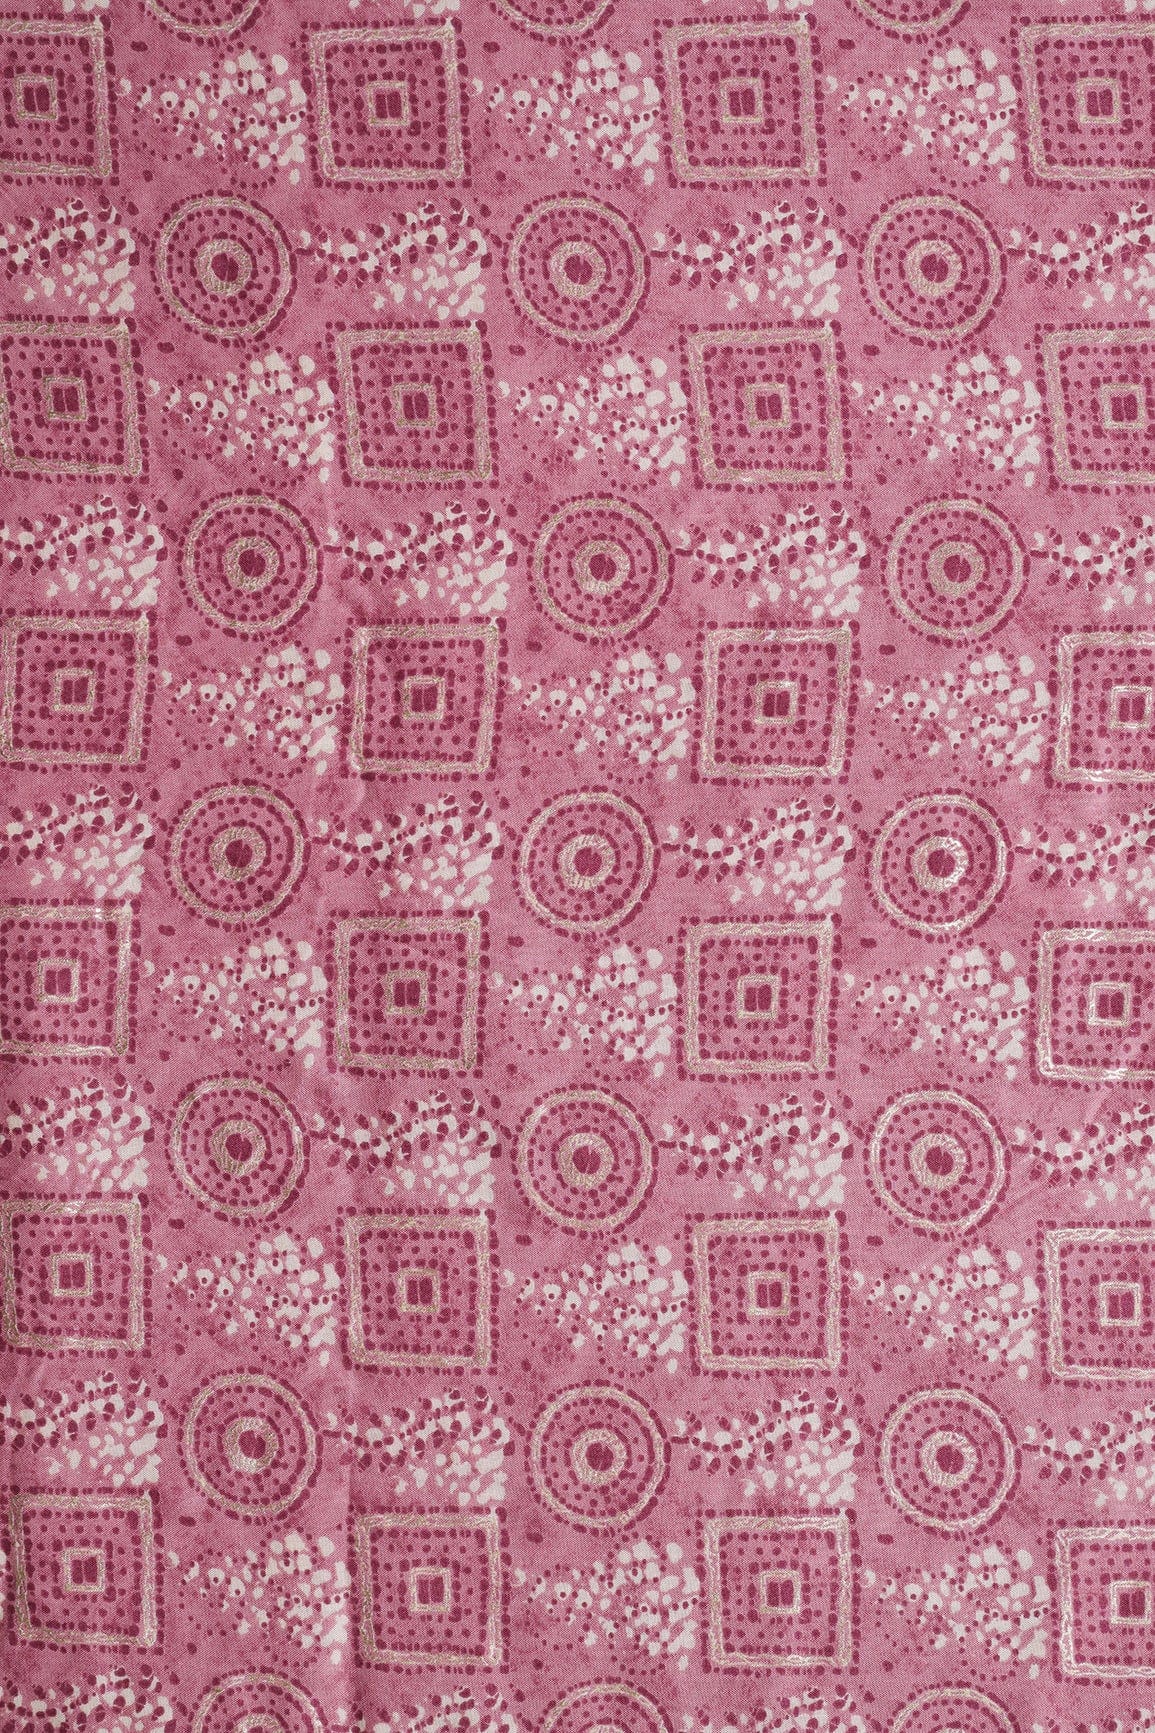 doeraa Prints Lavender Pink And Cream Geometric Foil Print On Pure Rayon Fabric